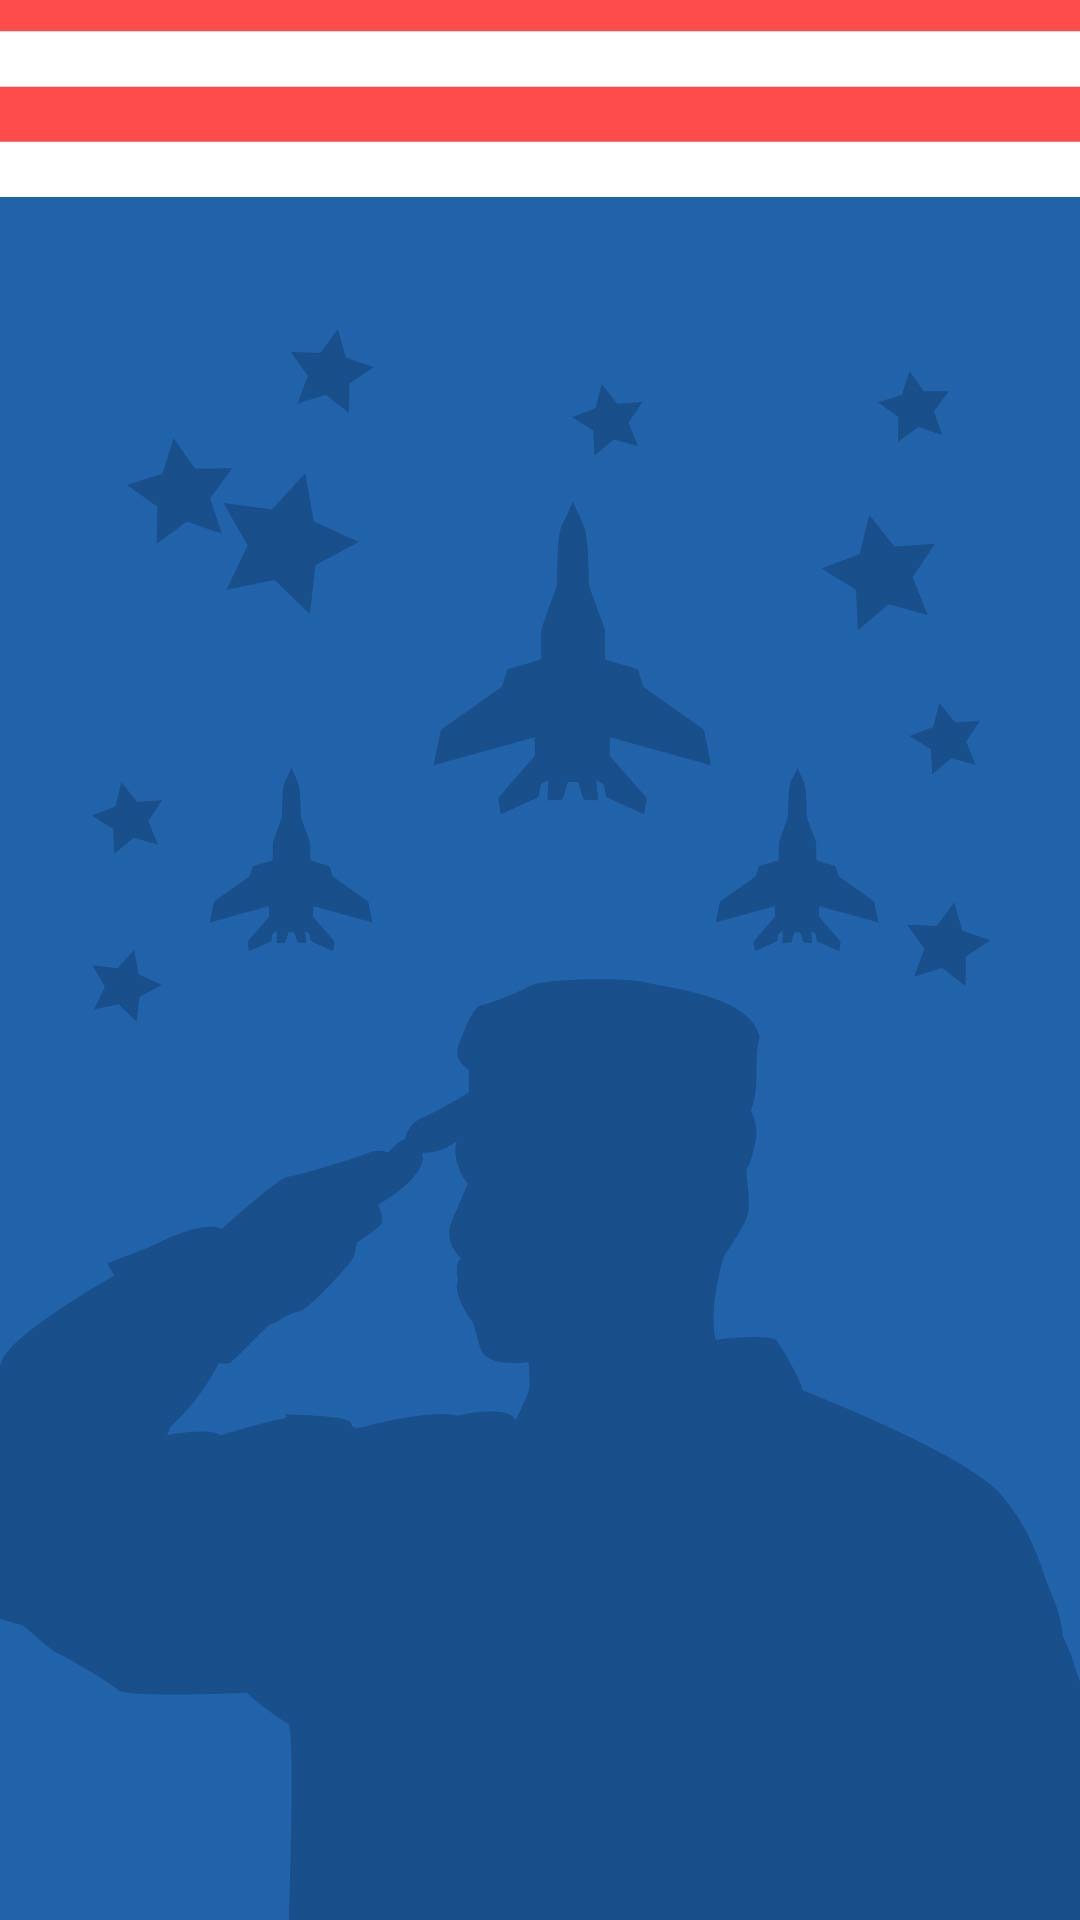 Armed Forces Day iPhone Background in PDF, Illustrator, PSD, EPS, SVG, JPG, PNG